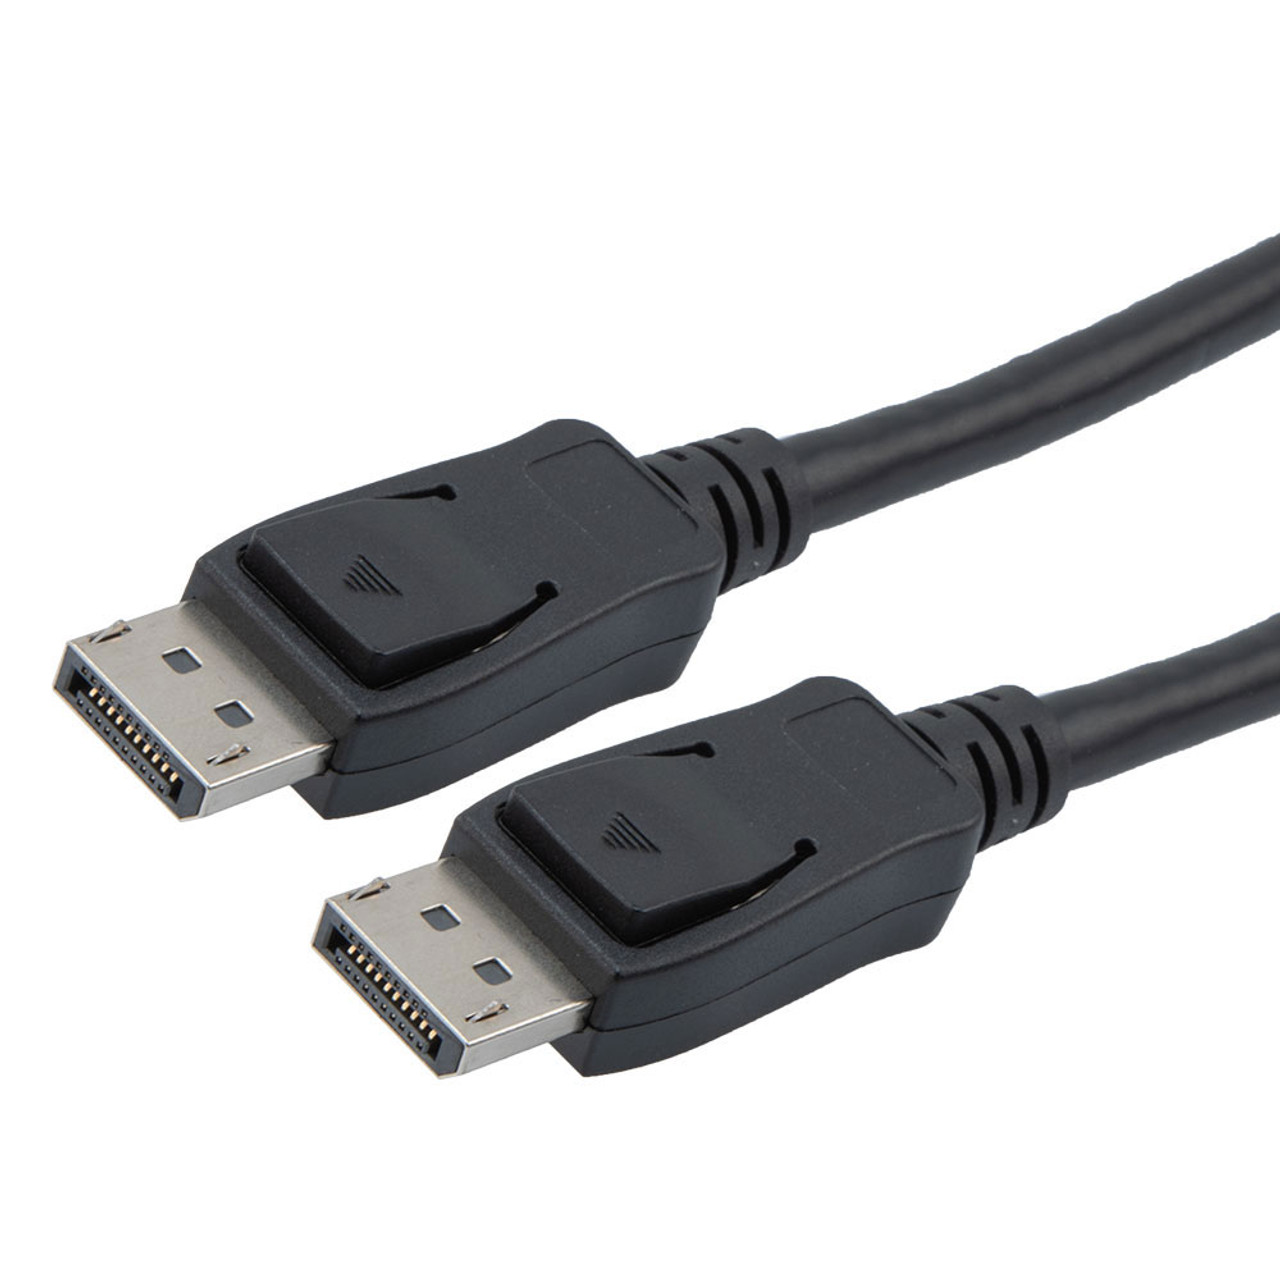 NavePoint DisplayPort 2.0 Male to Male Cable, PVC Jacket, Black, PVC shell, Supports 16K @ 120Hz, 3M 